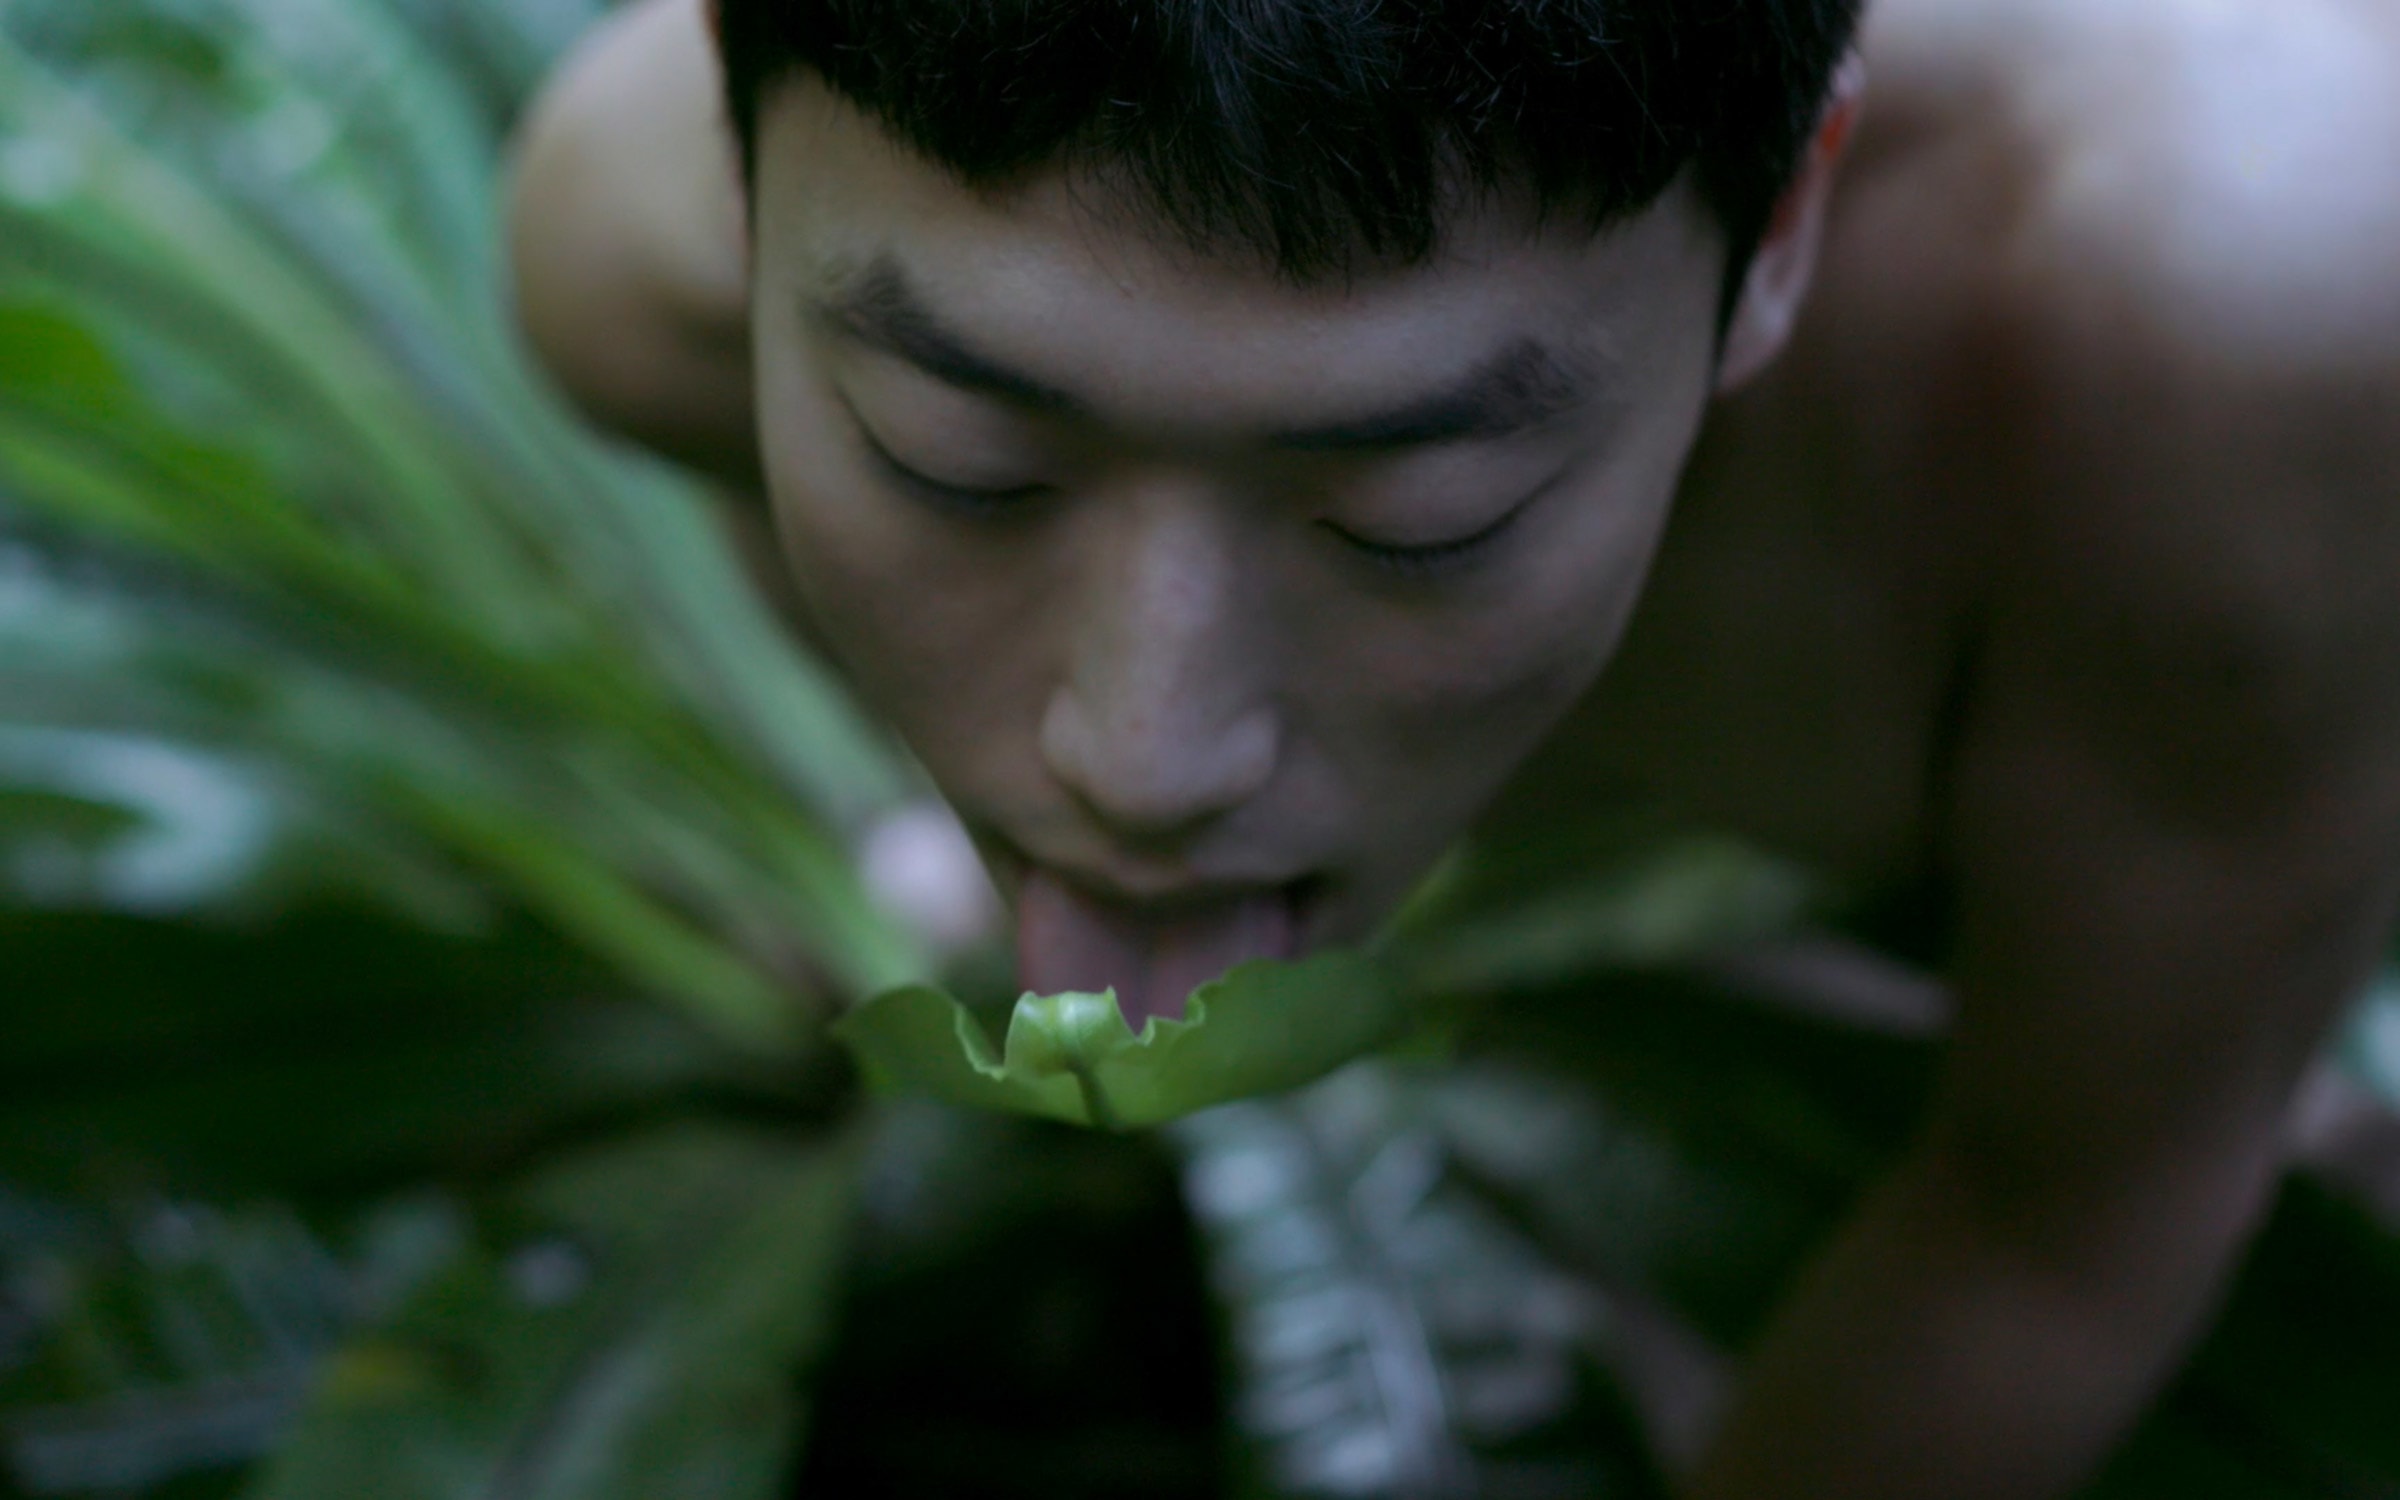 Zheng Bo, Pteridophilia II, 2018. Film still from 4K video, color, sound, 20min. Courtesy of the artist and Edouard Malingue Gallery, Hong Kong and Shanghai.